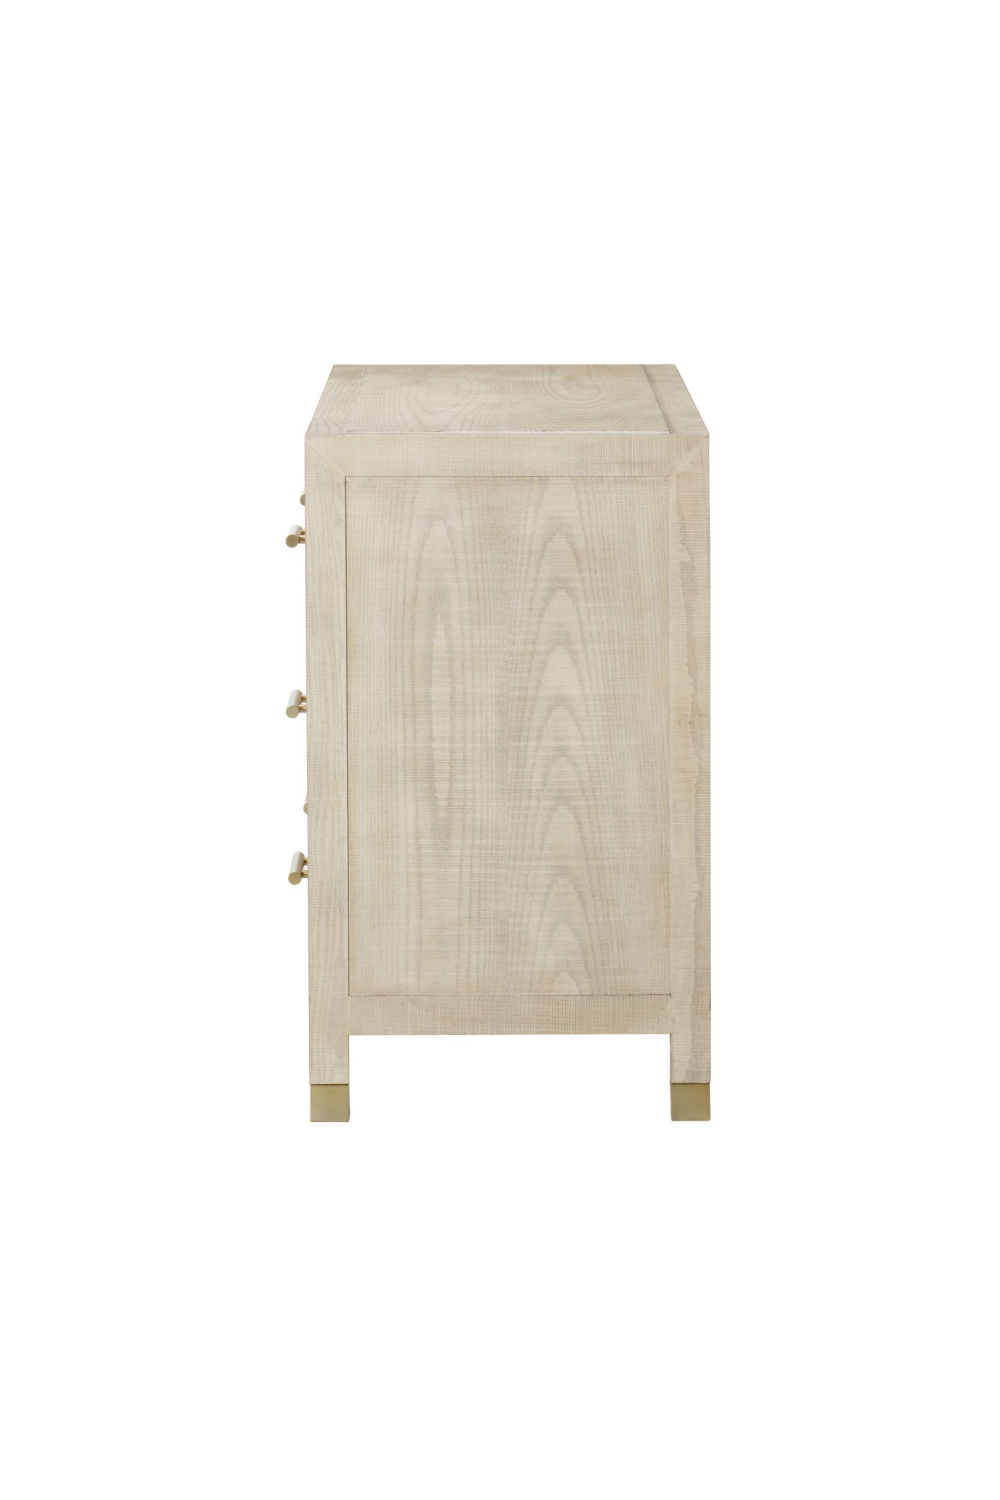 Solid Ash Chest of Drawers - M | Andrew Martin Raffles | OROA